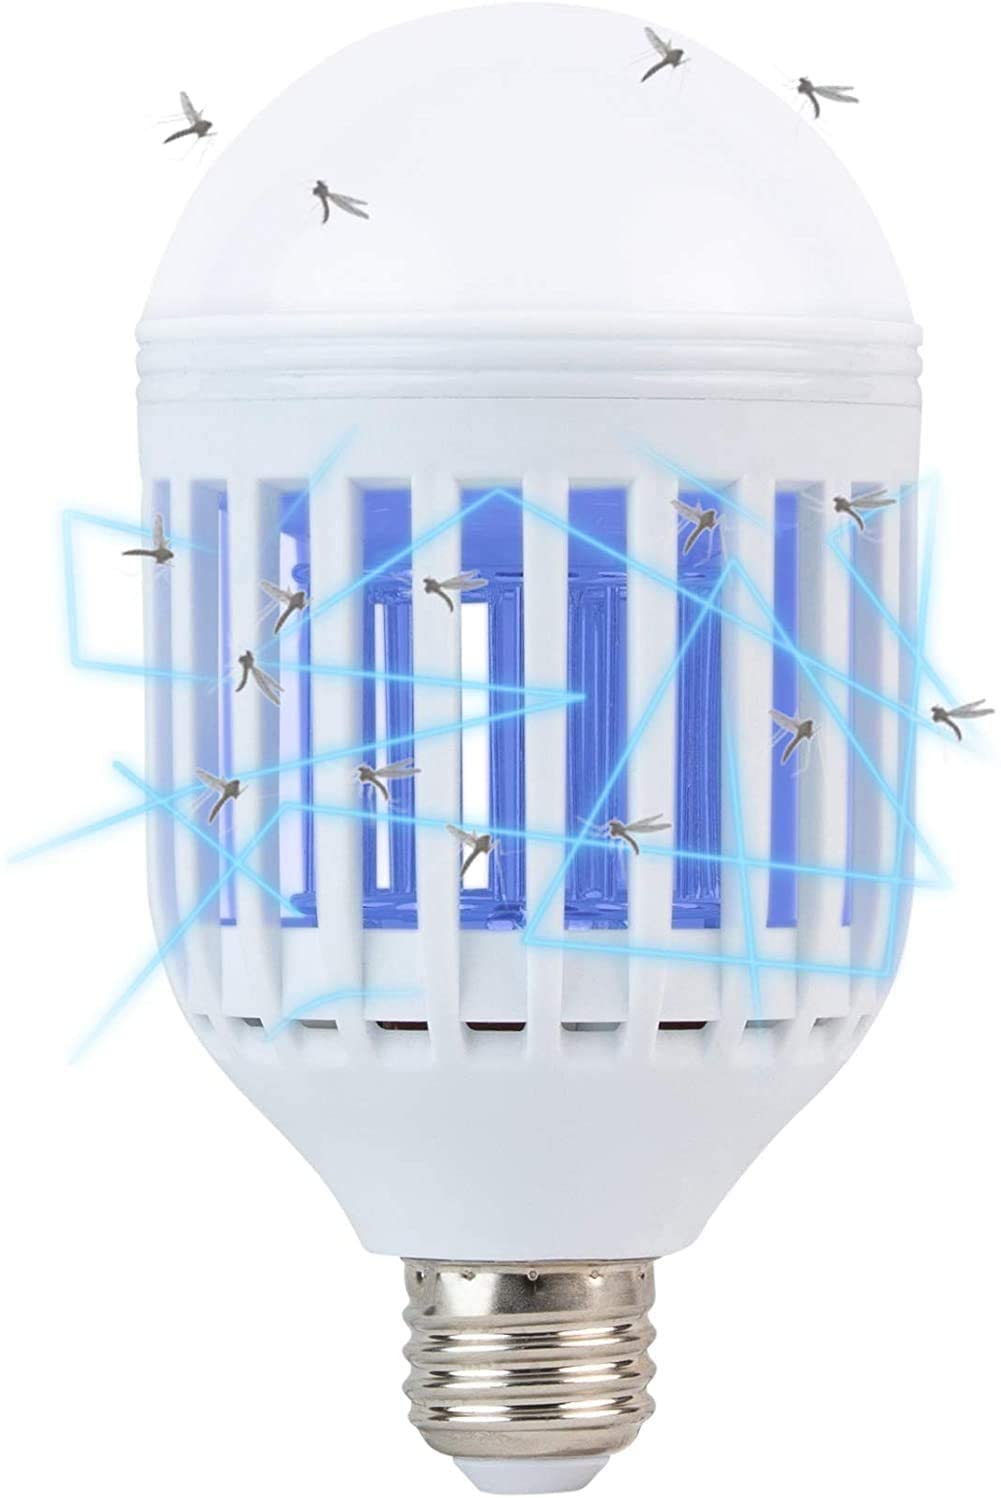 Bug Zapper Light Bulb 2 in 1 Mosquito Killer Lamp LED Electronic Insect &amp; Fly Killer Indoor &amp; Outdoor Insect Zapper insect traps, Fly Zapper Safe &amp; Non-Toxic Silent &amp; Effortle - Home Decor Gifts and More